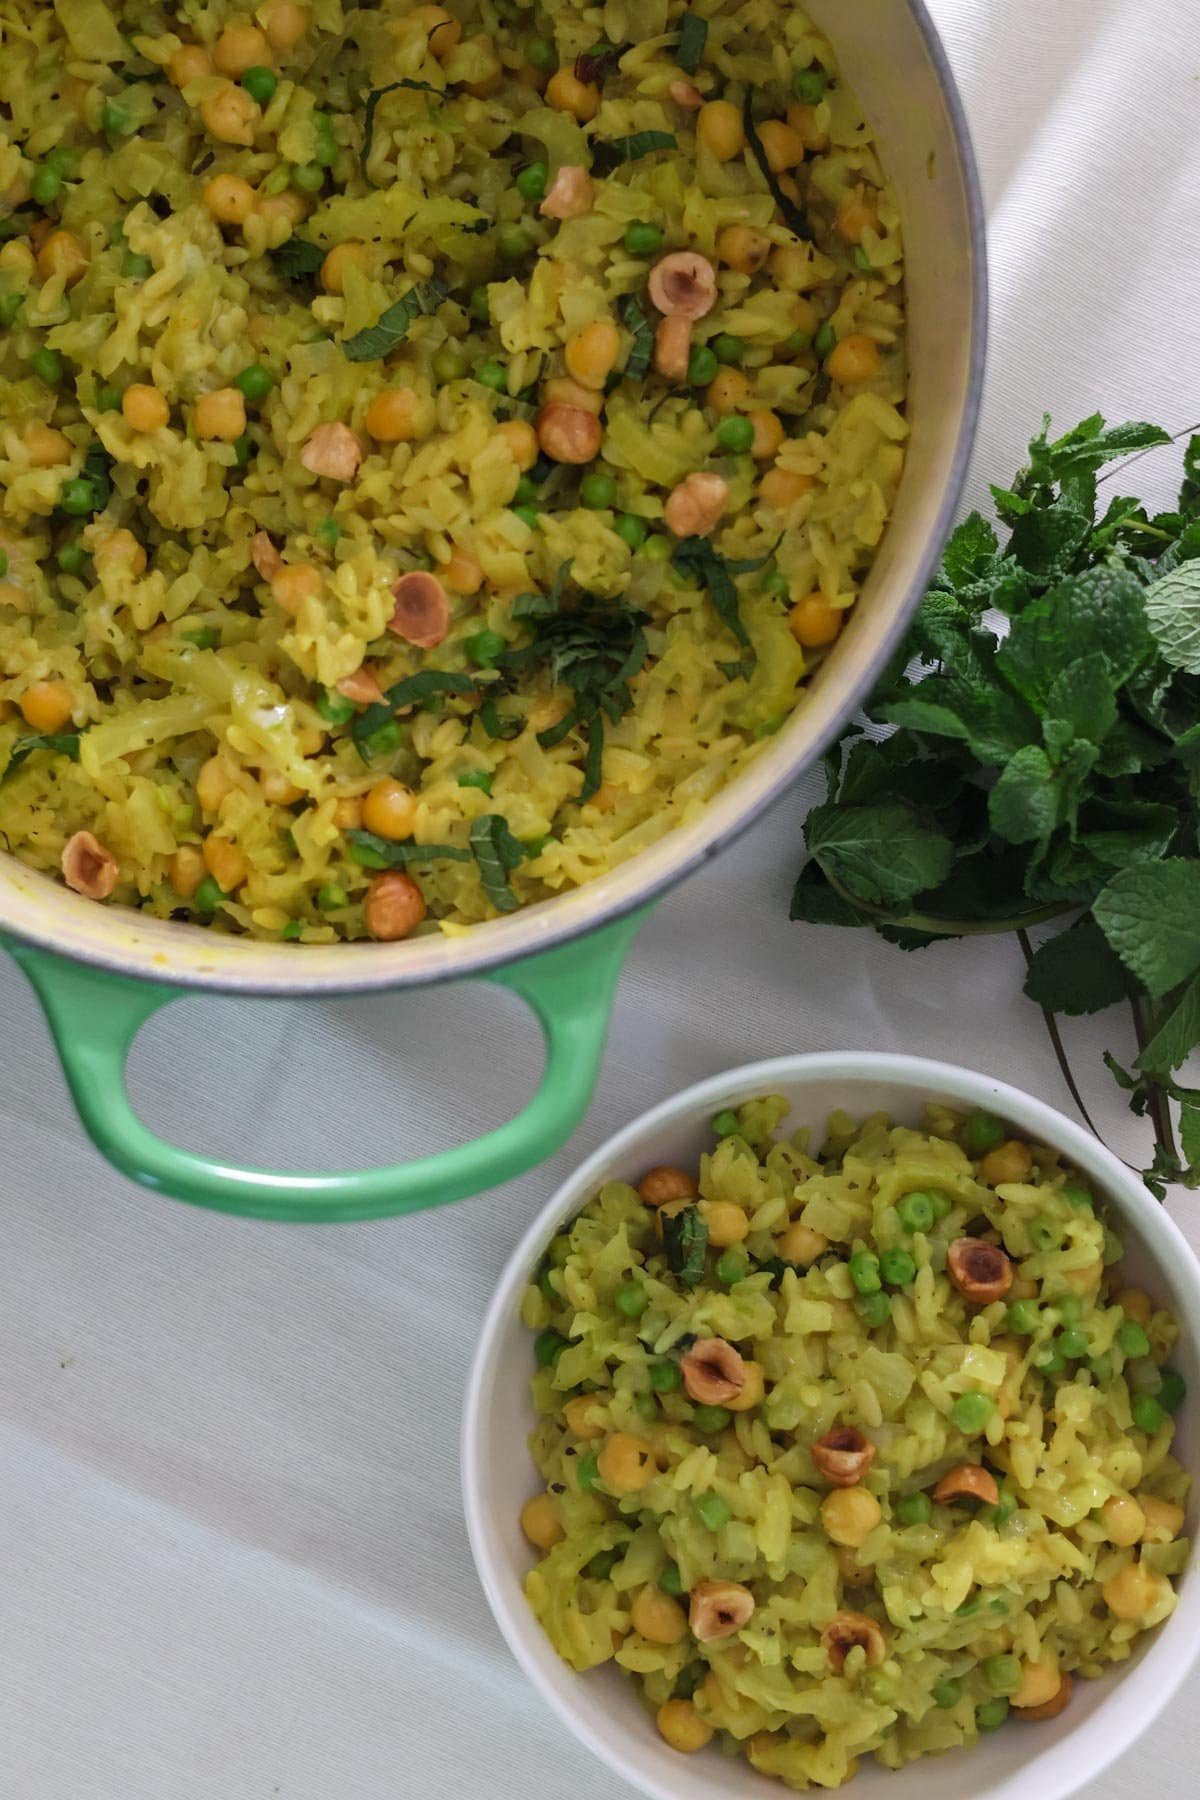 The orzo with chickpeas recipe in a large green pot and in a small white bowl on the side.